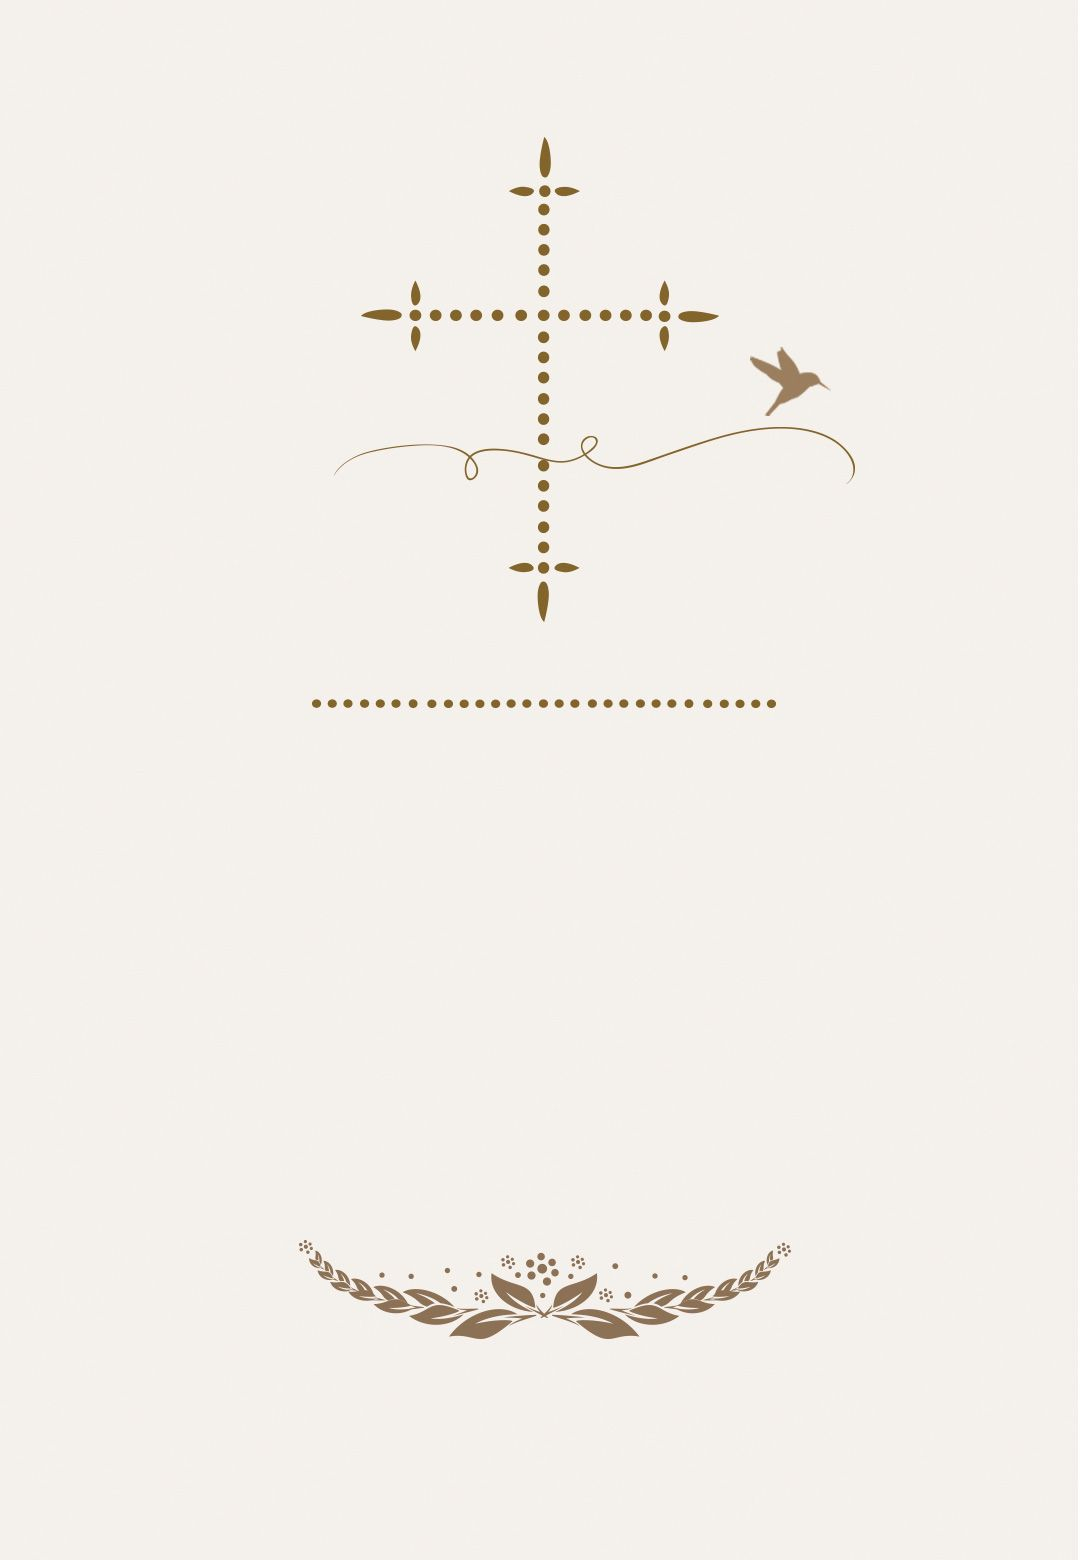 Stylized Cross Free Communion Invitation Template Greetings throughout dimensions 1080 X 1560